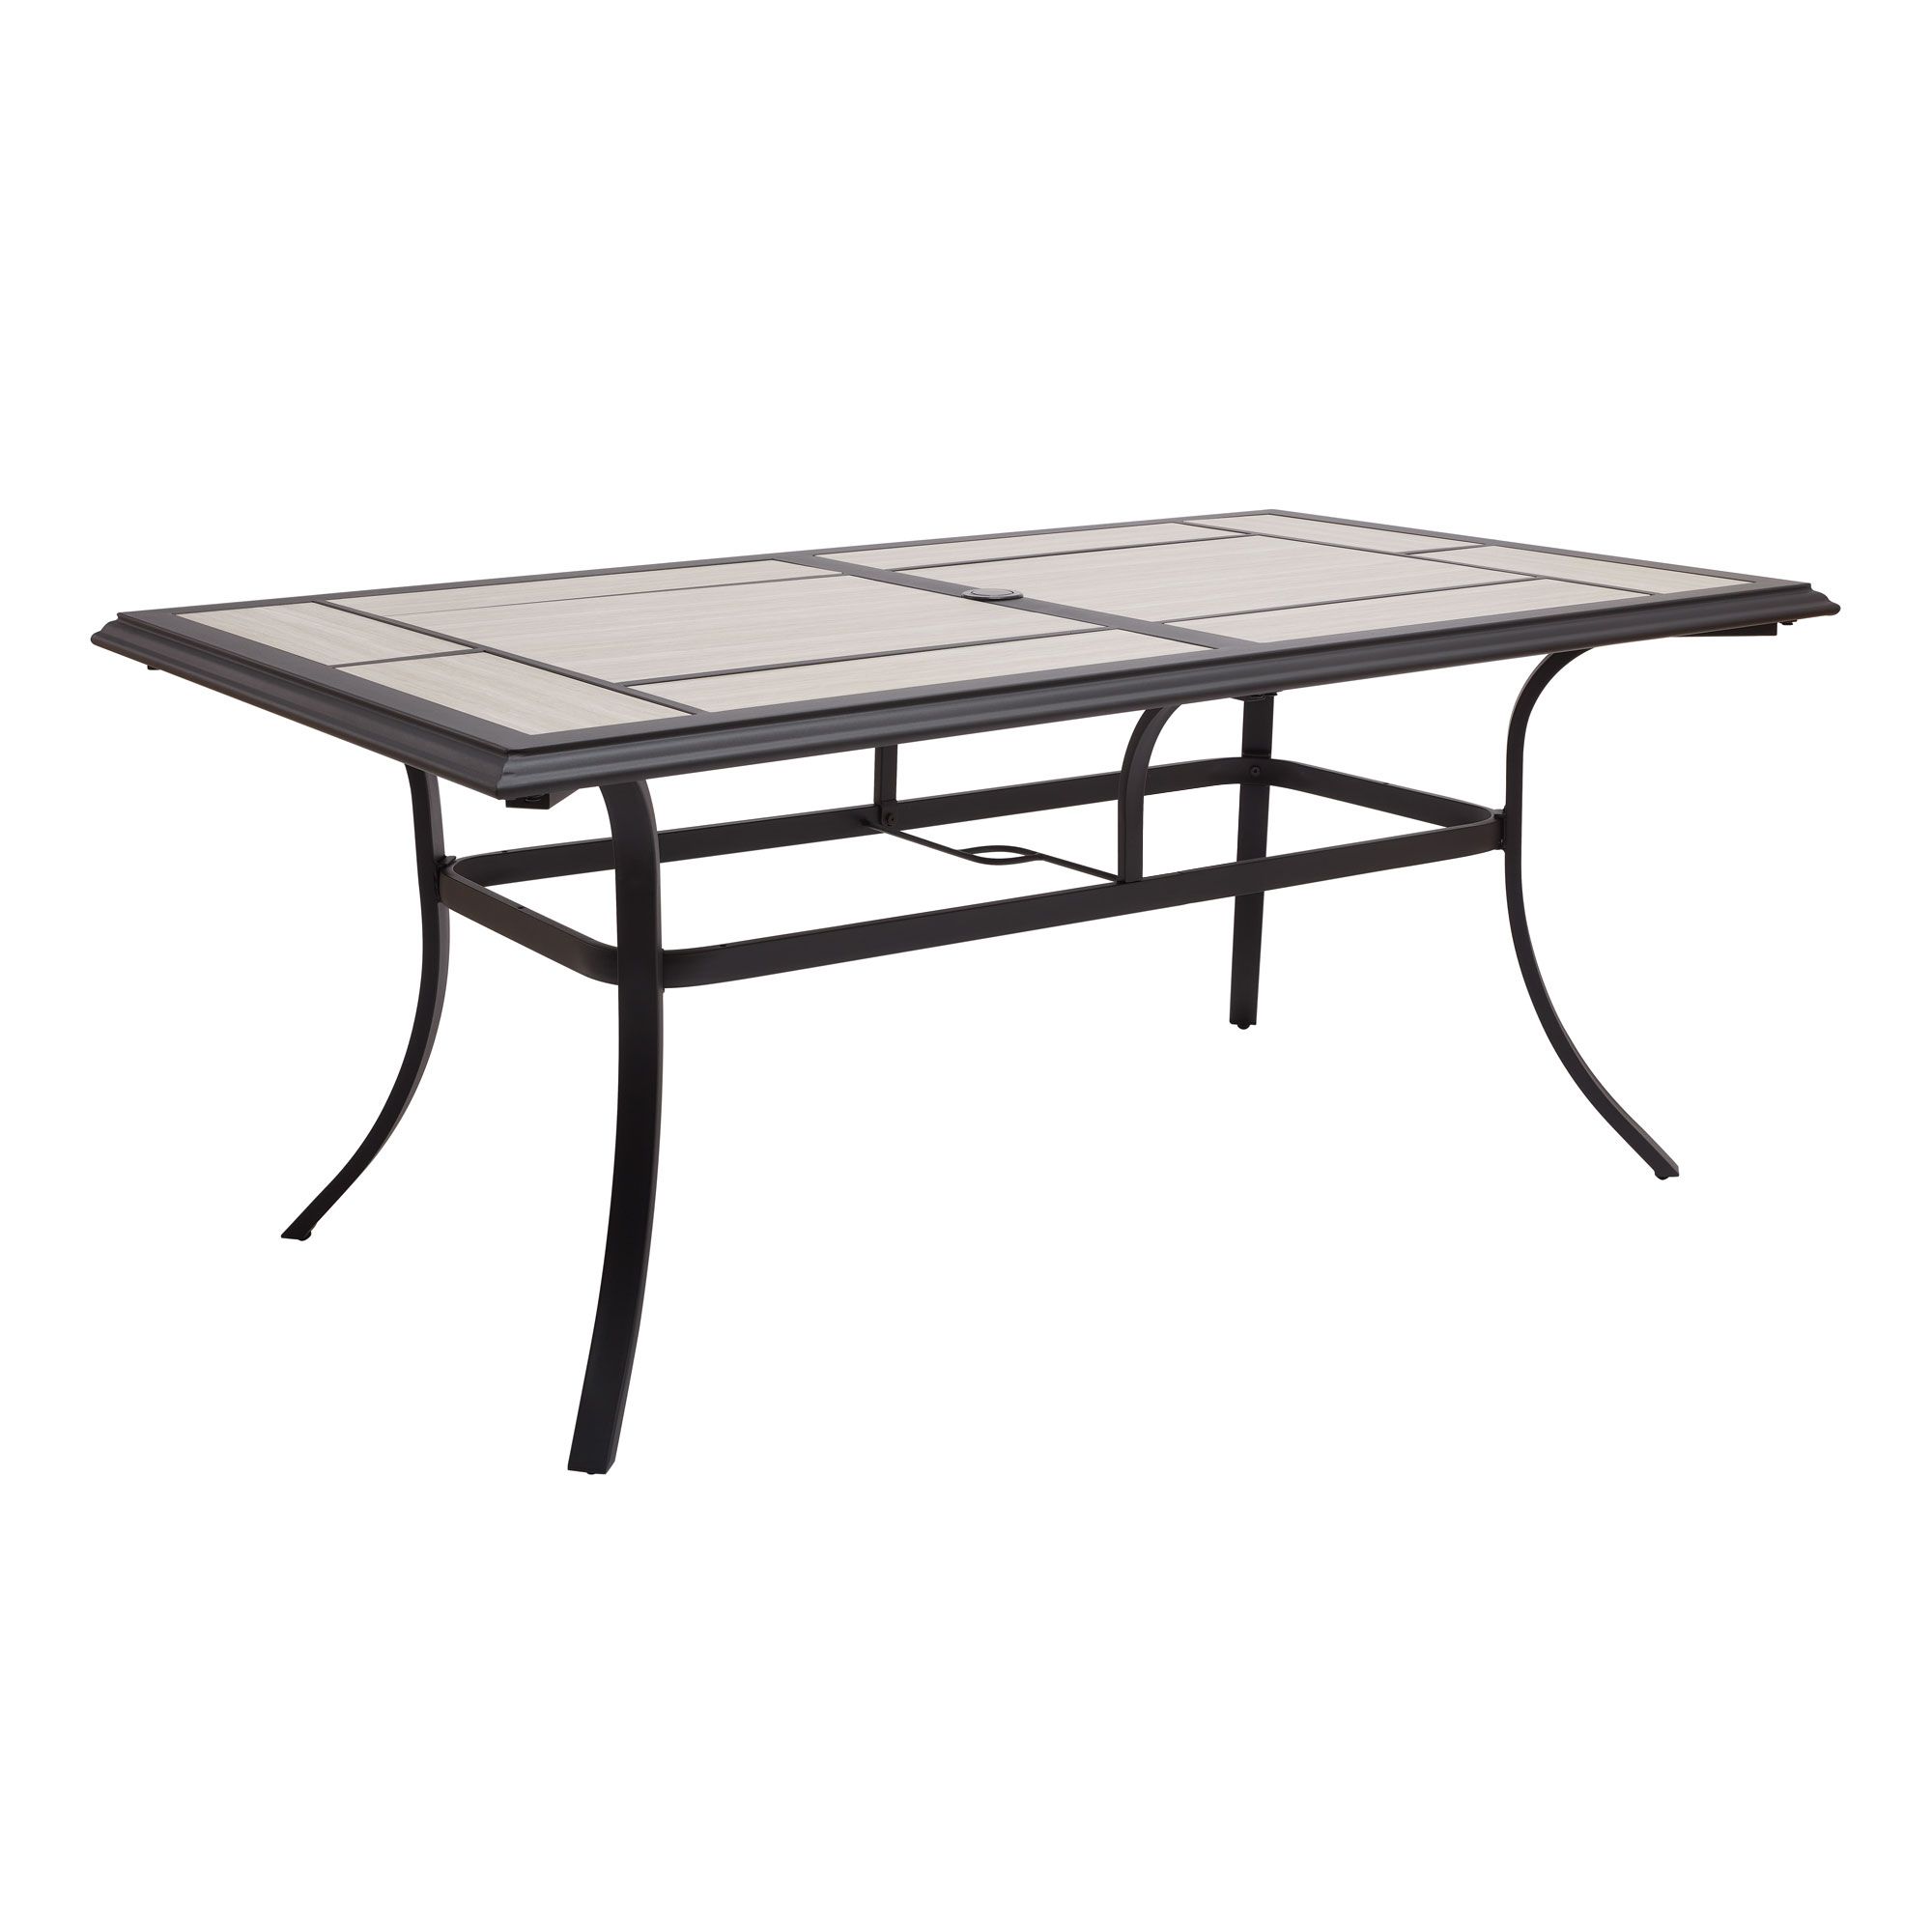 Better Homes & Gardens Newport Outdoor Ceramic Tile Top Rectangular Dining Table with Umbrella Hole, Gray Tabletop, Black Frame Finish, Seats 6 - image 1 of 8